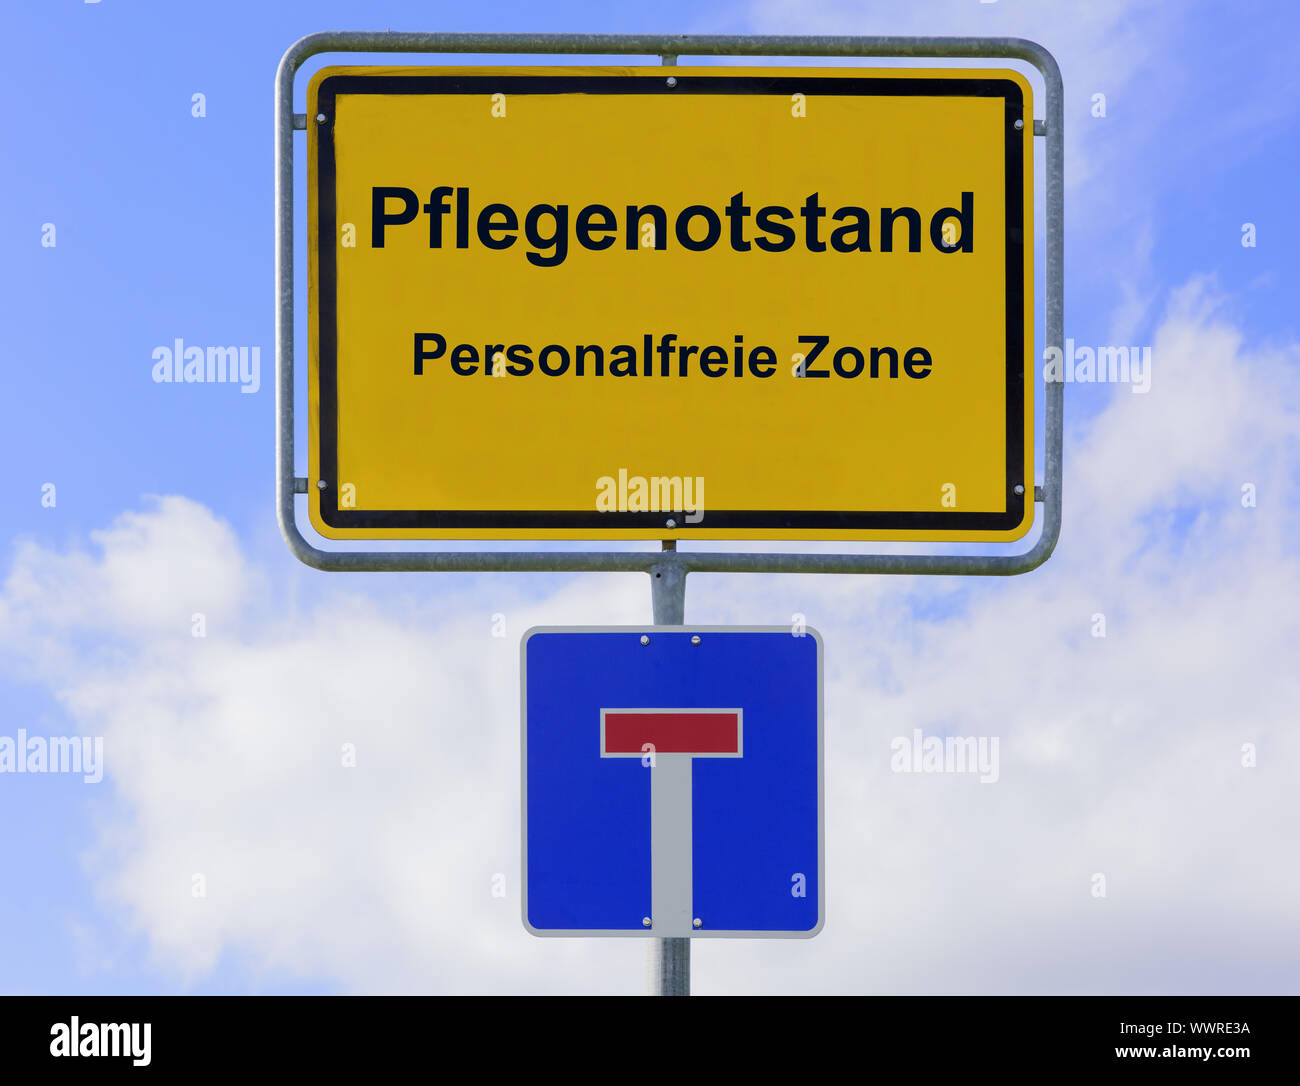 Nursing emergency in personnel-free zone on place-name sign Stock Photo